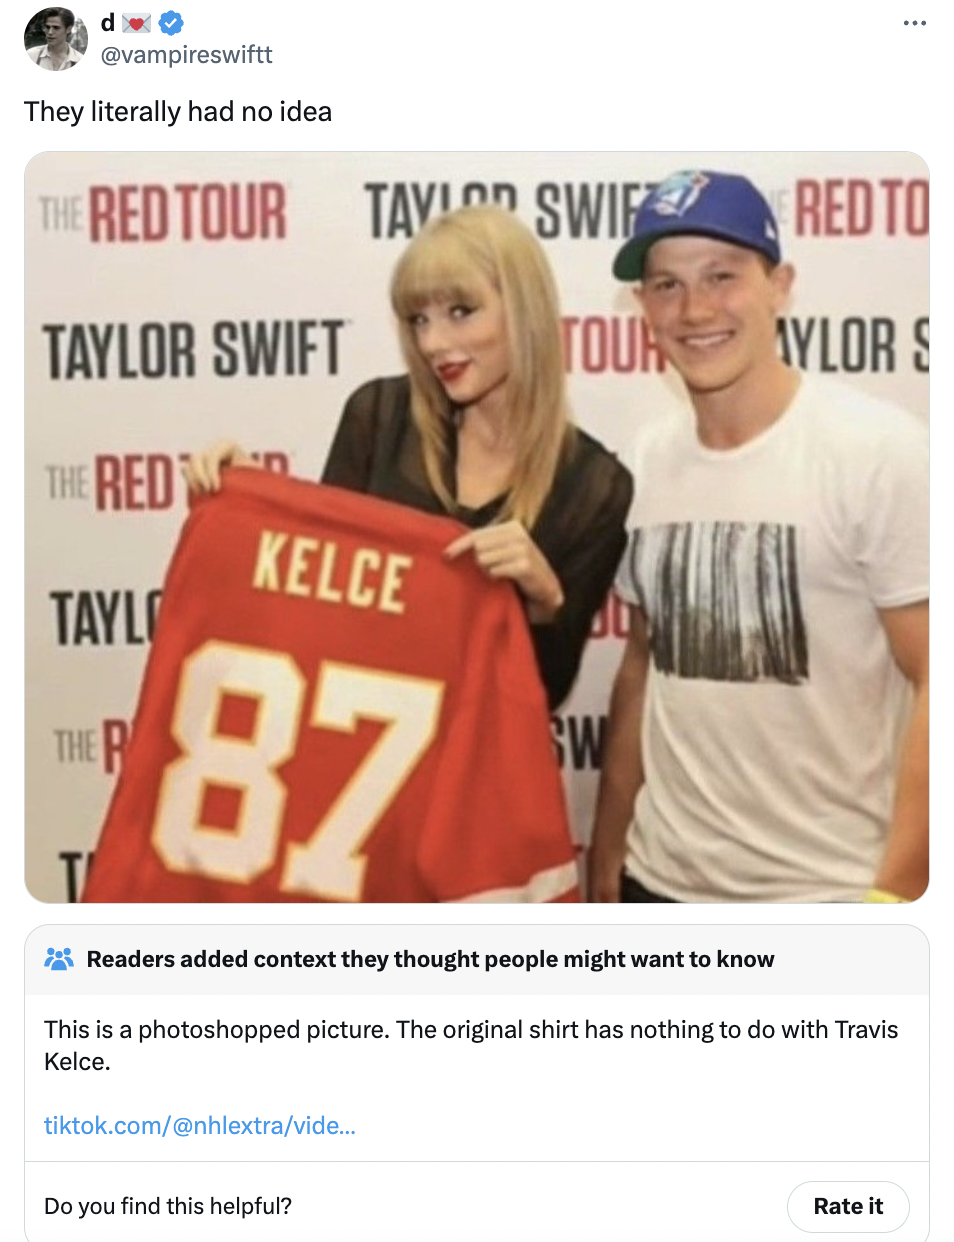 taylor swift travis kelce jeff skinner - They literally had no idea The Red Tour Tavi Swif Taylor Swift Red To Tour Aylors The Red Kelce Tayl The P Sw 87 Readers added context they thought people might want to know This is a photoshopped picture. The orig